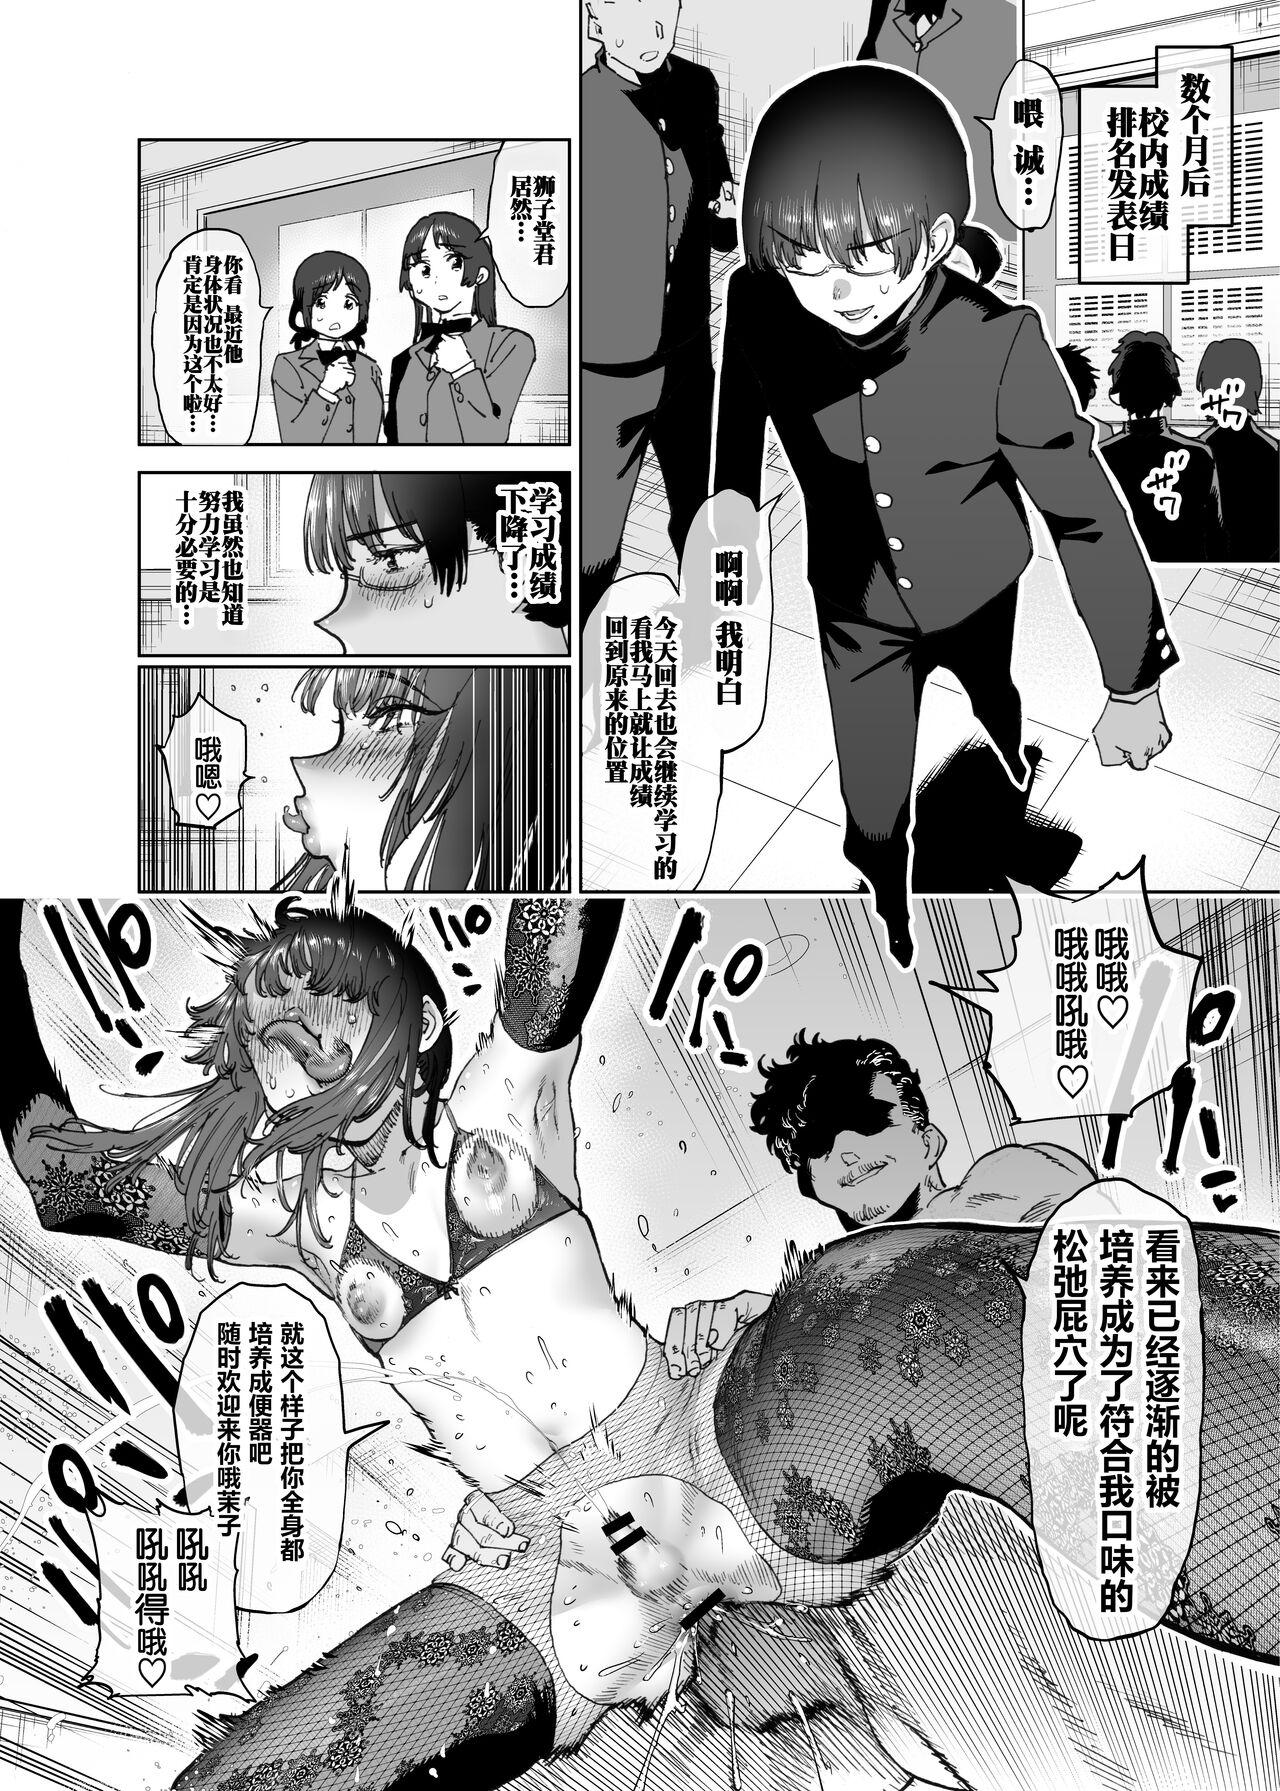 Hermana Let's imitate together! Shishido-kun's future plans Bed - Page 10